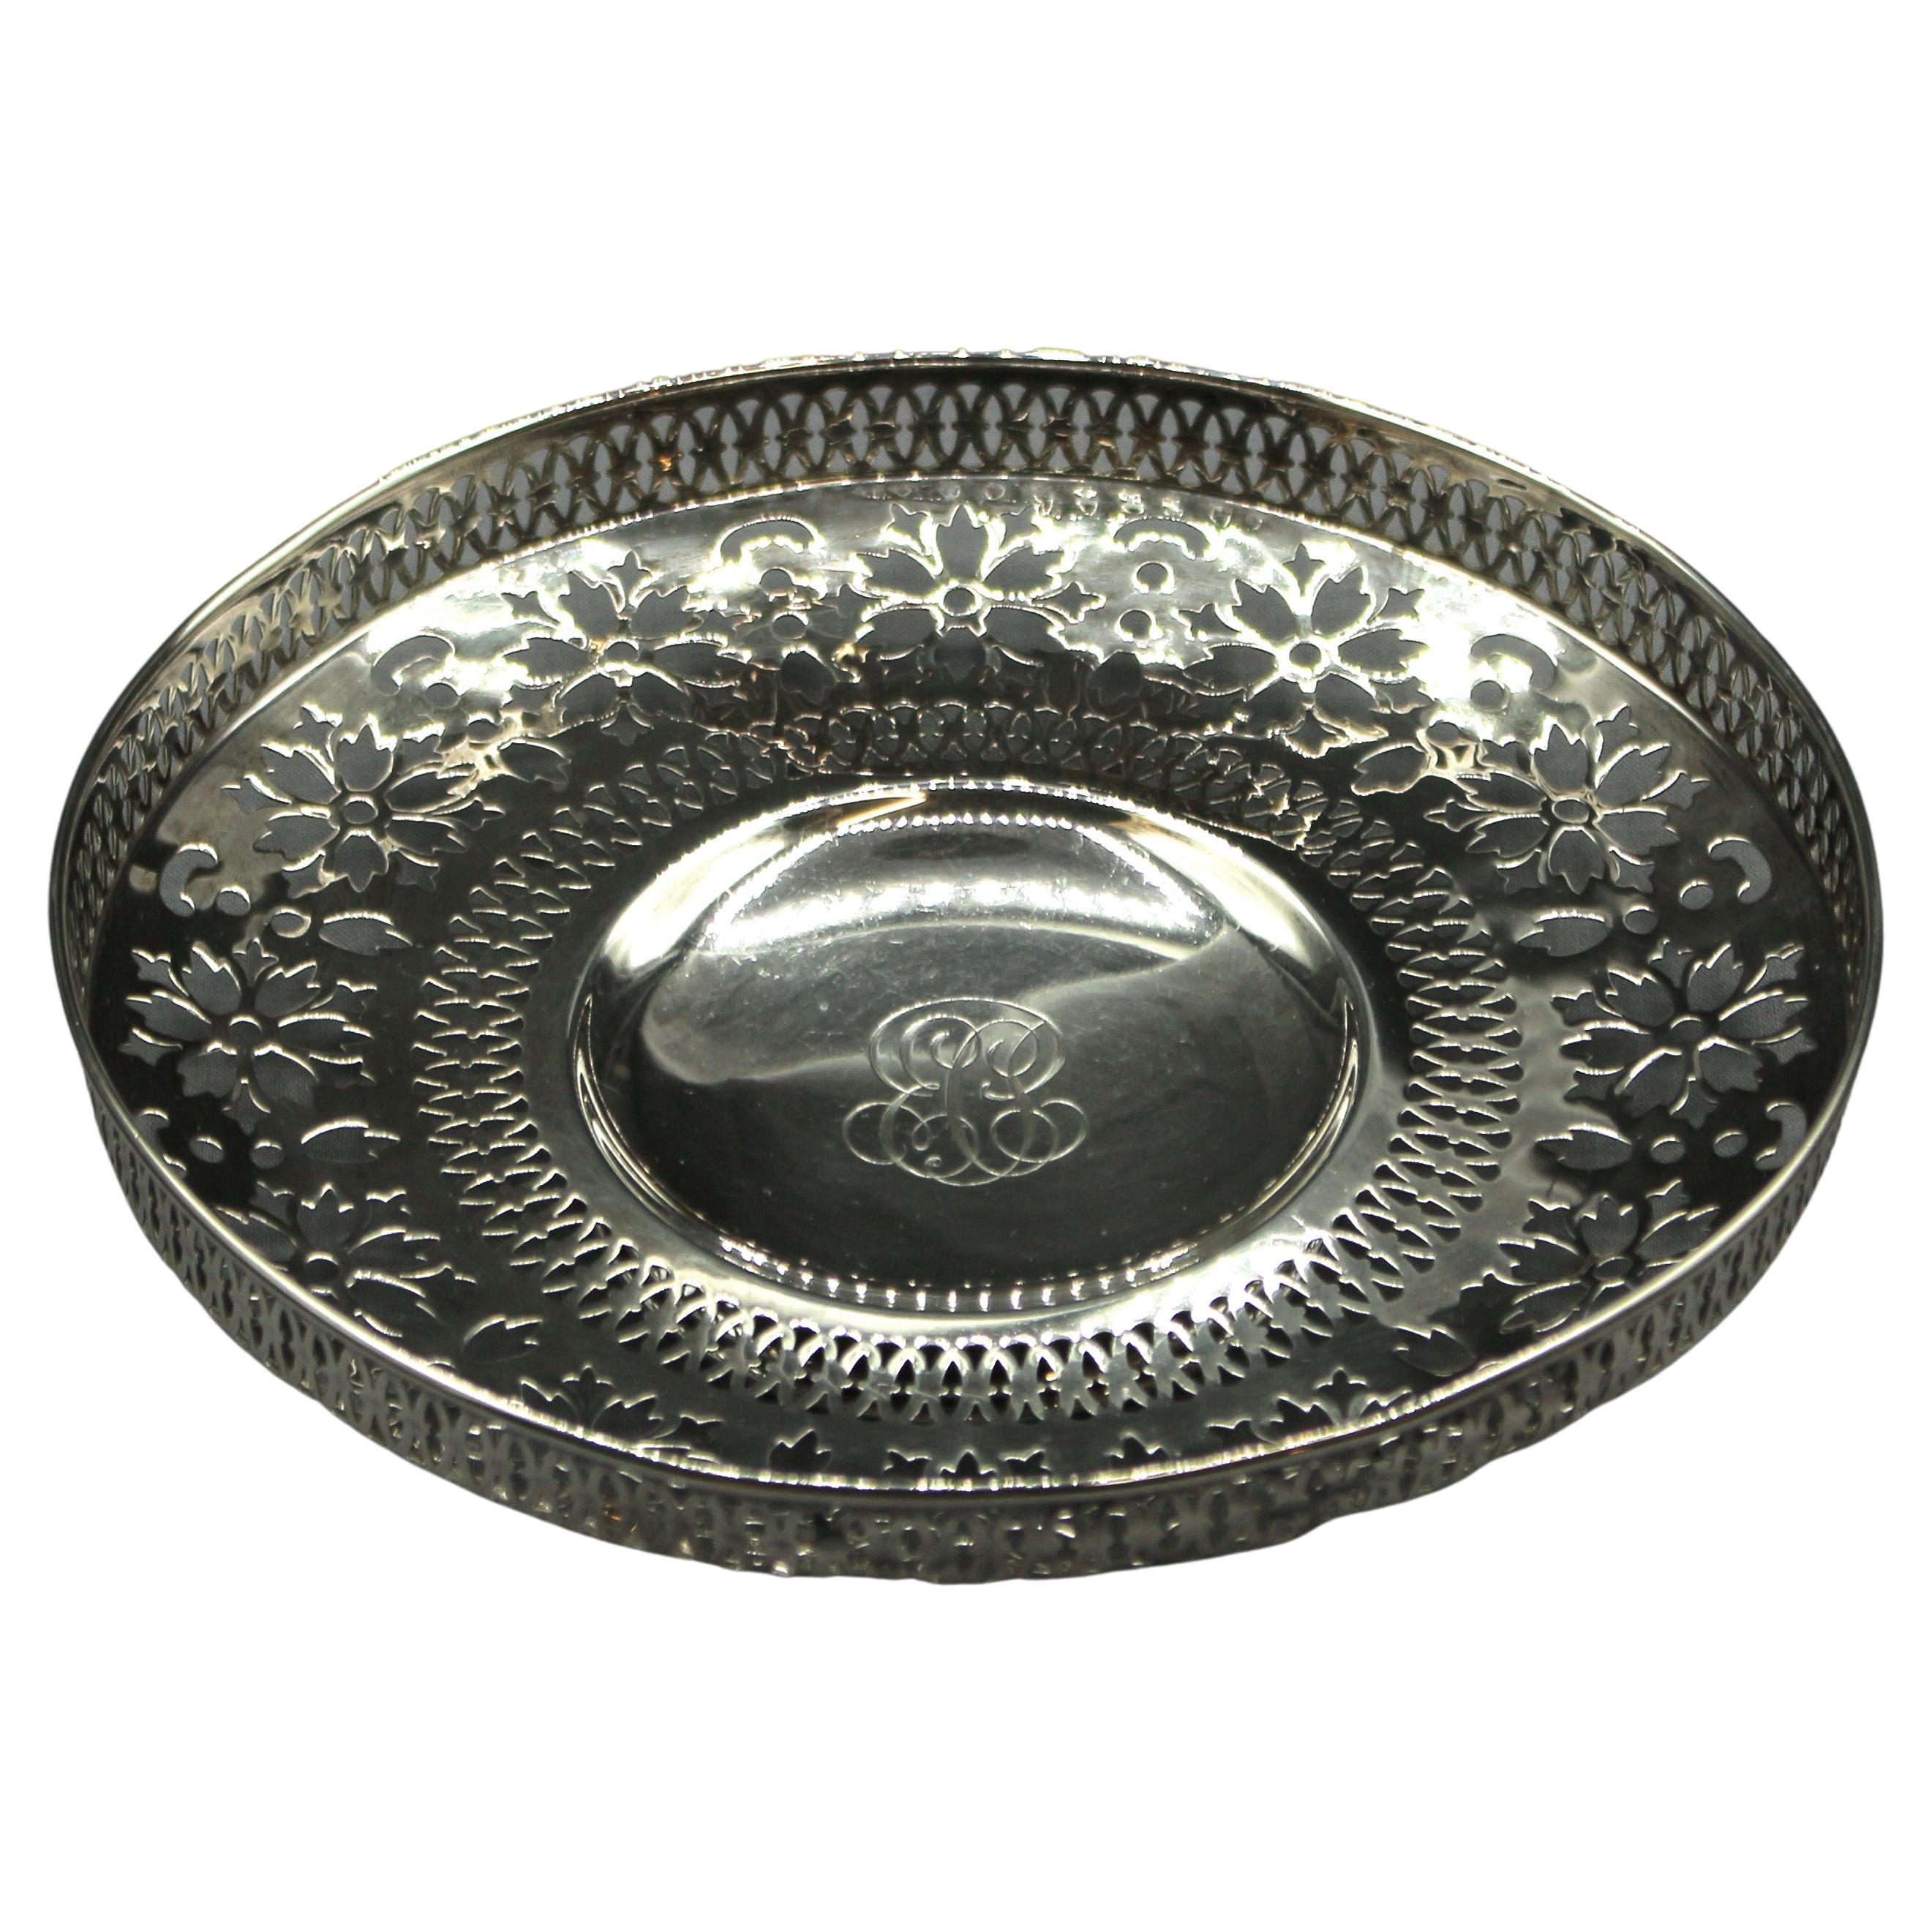 Sterling Silver Gorham Calling Card Tray, circa 1930s